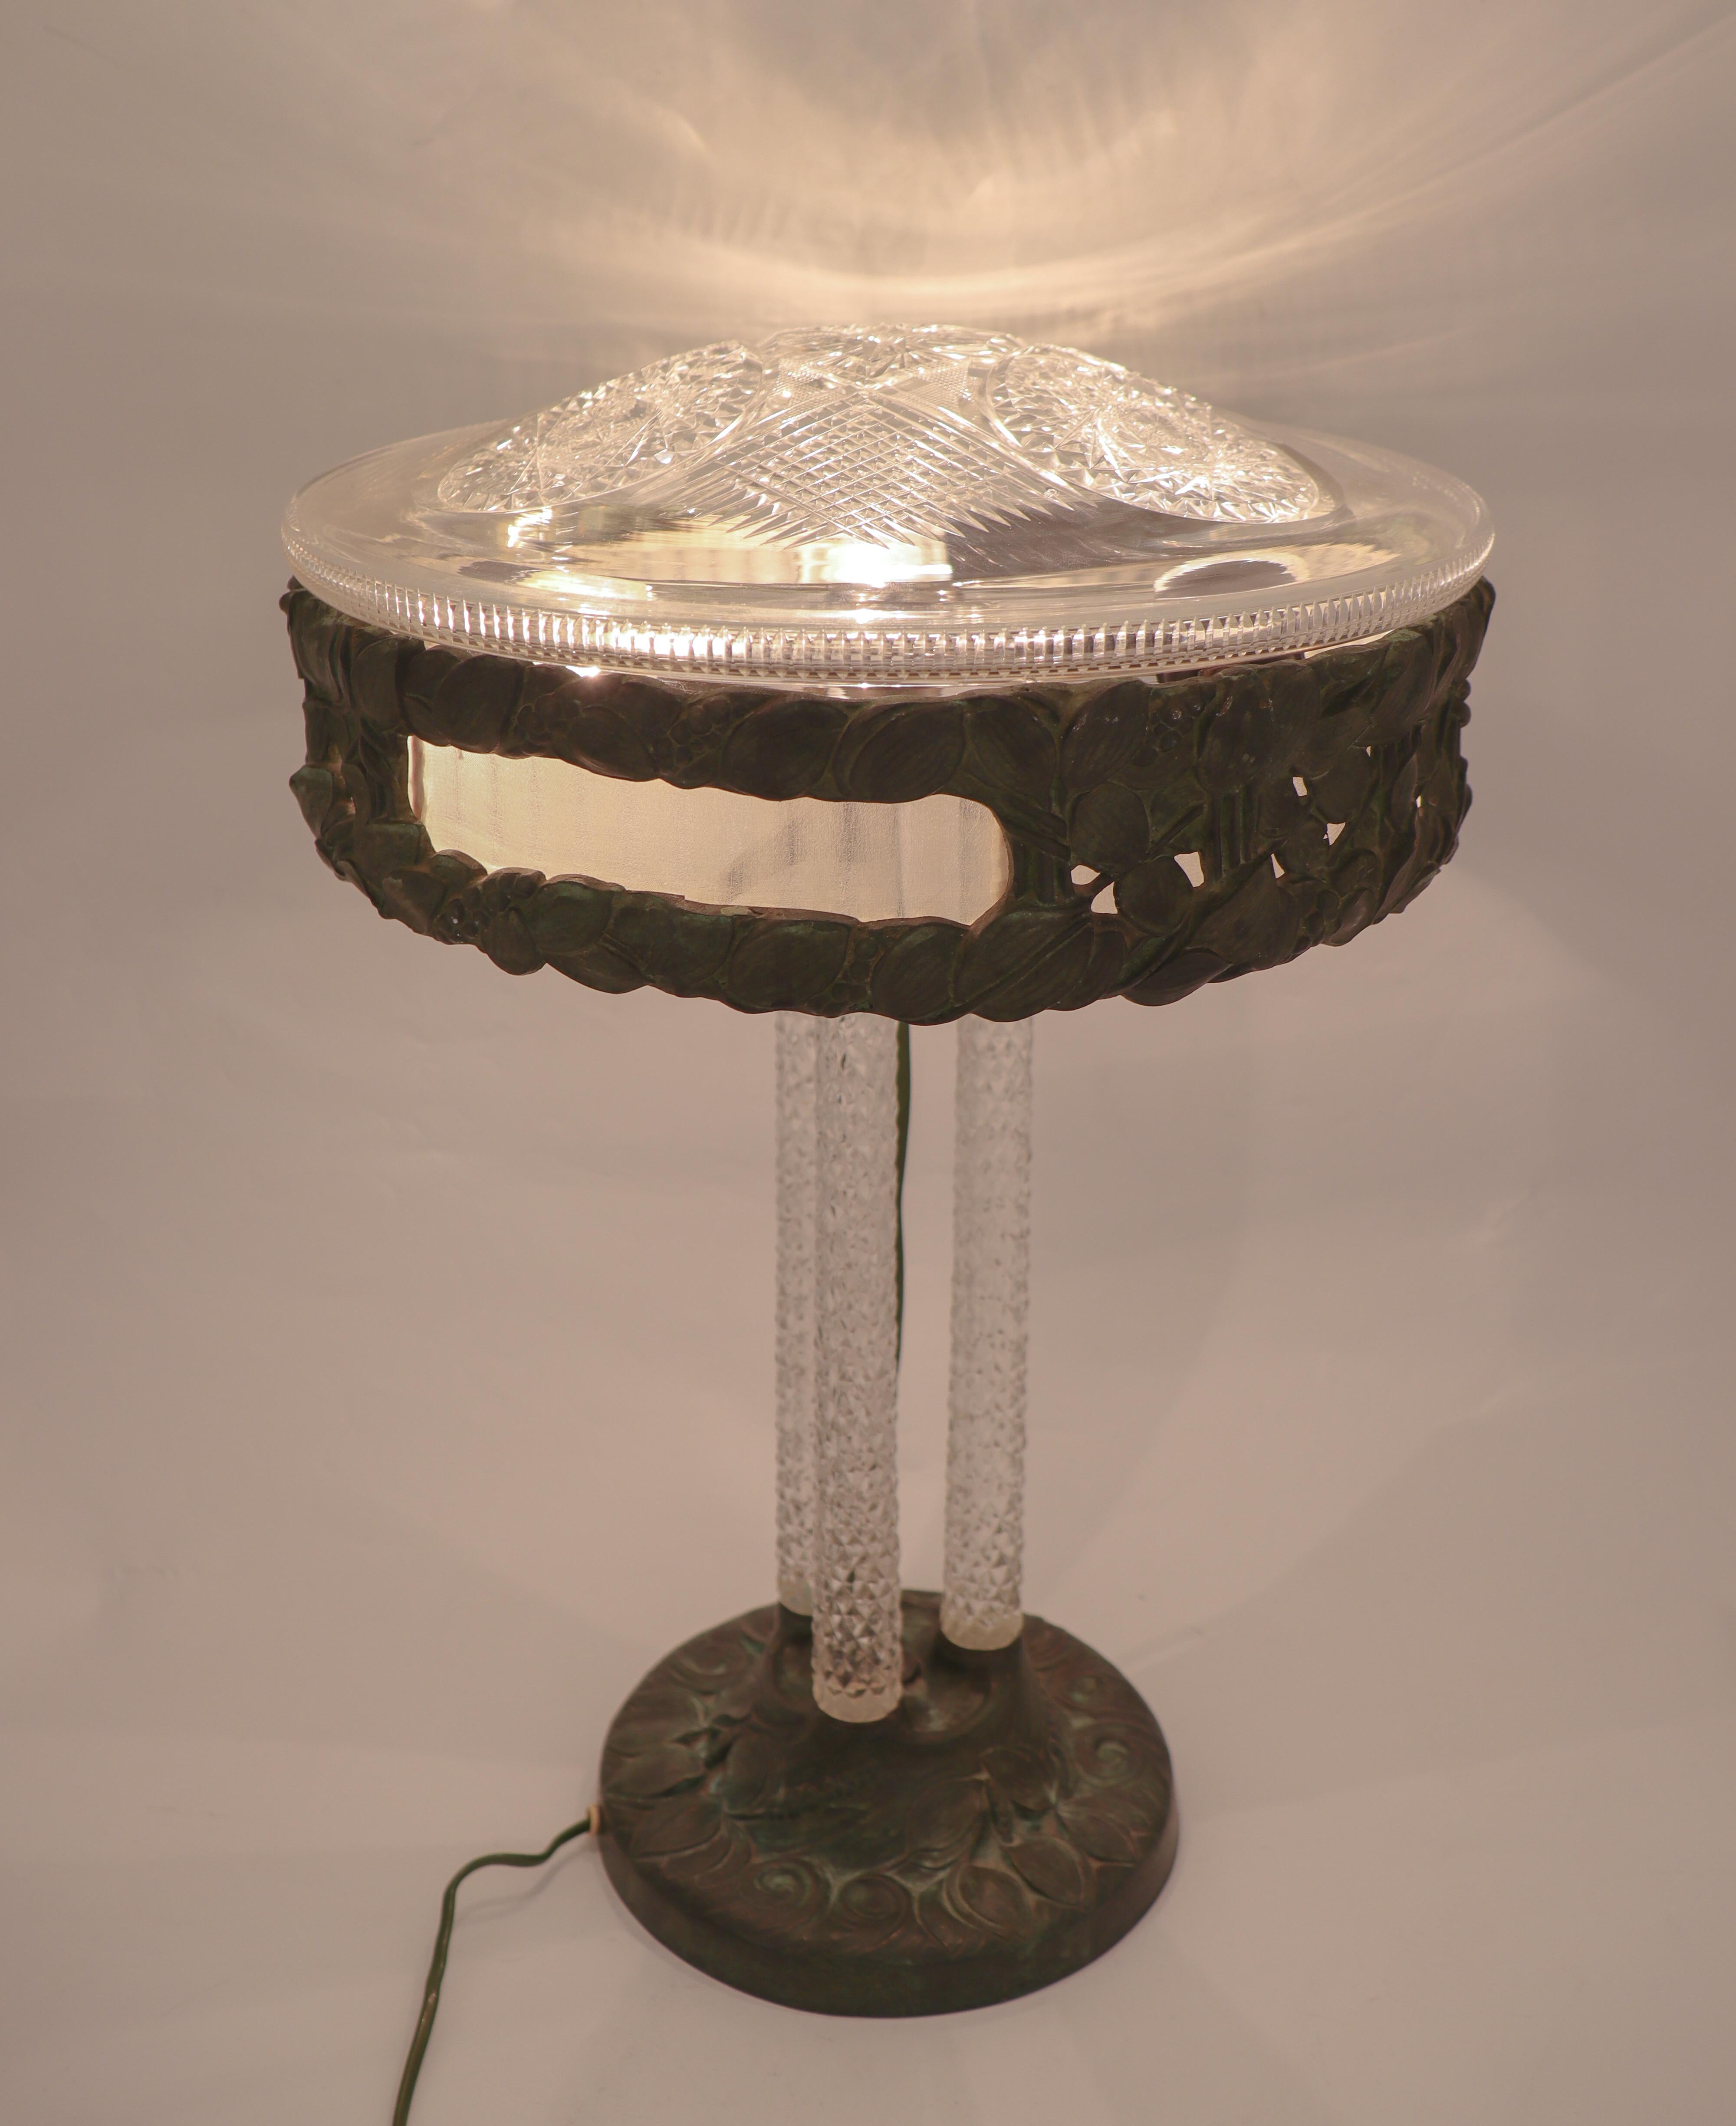 A stunning and very rare table lamp from Arvid Böhlmarks Lamp factory in Stockholm. This lamp was designed in 1909 and has a base and top in bronze, stunning crystal columns and a crystal lamp shade. The lamp is pictured and described in Böhlmarks